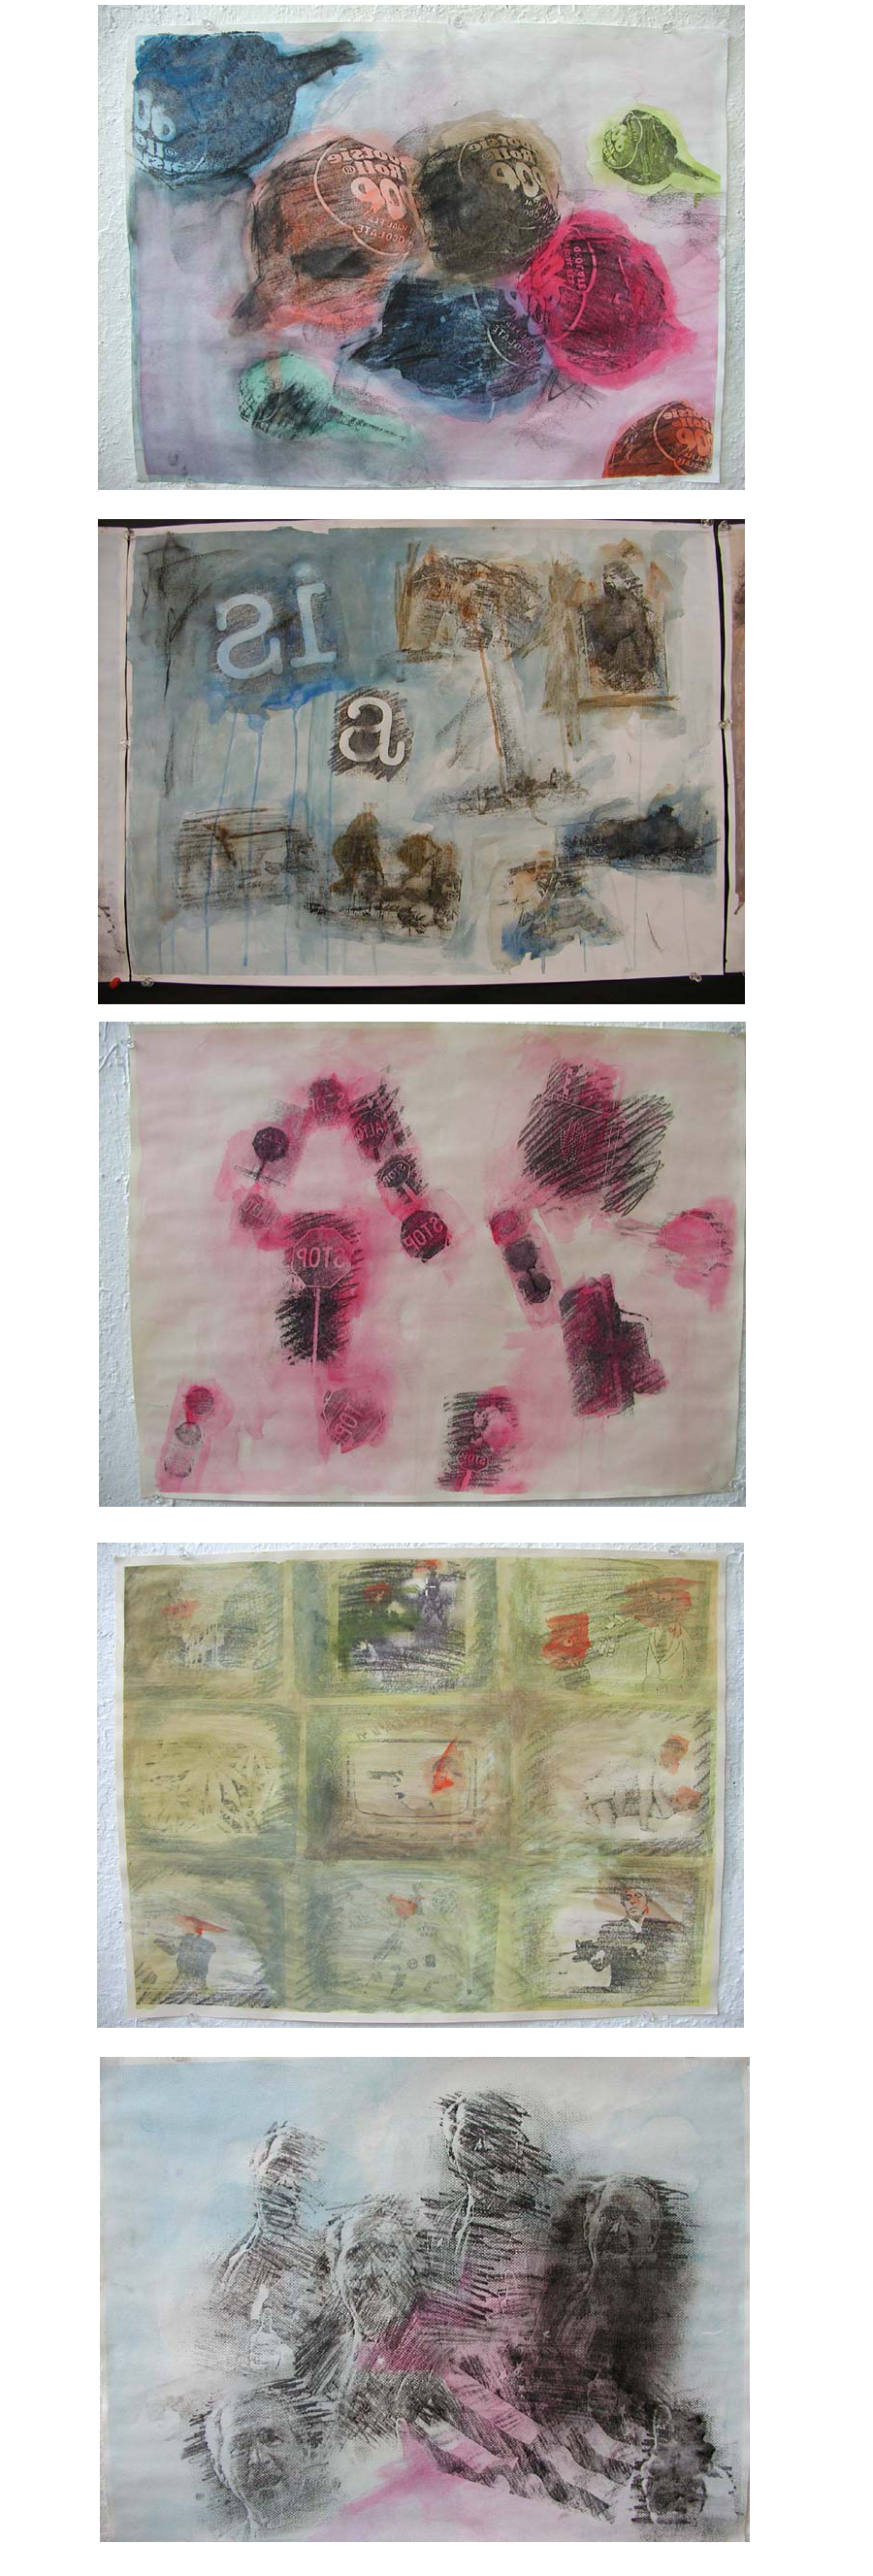 A series of mixed media paintings with graphite, watercolor and print